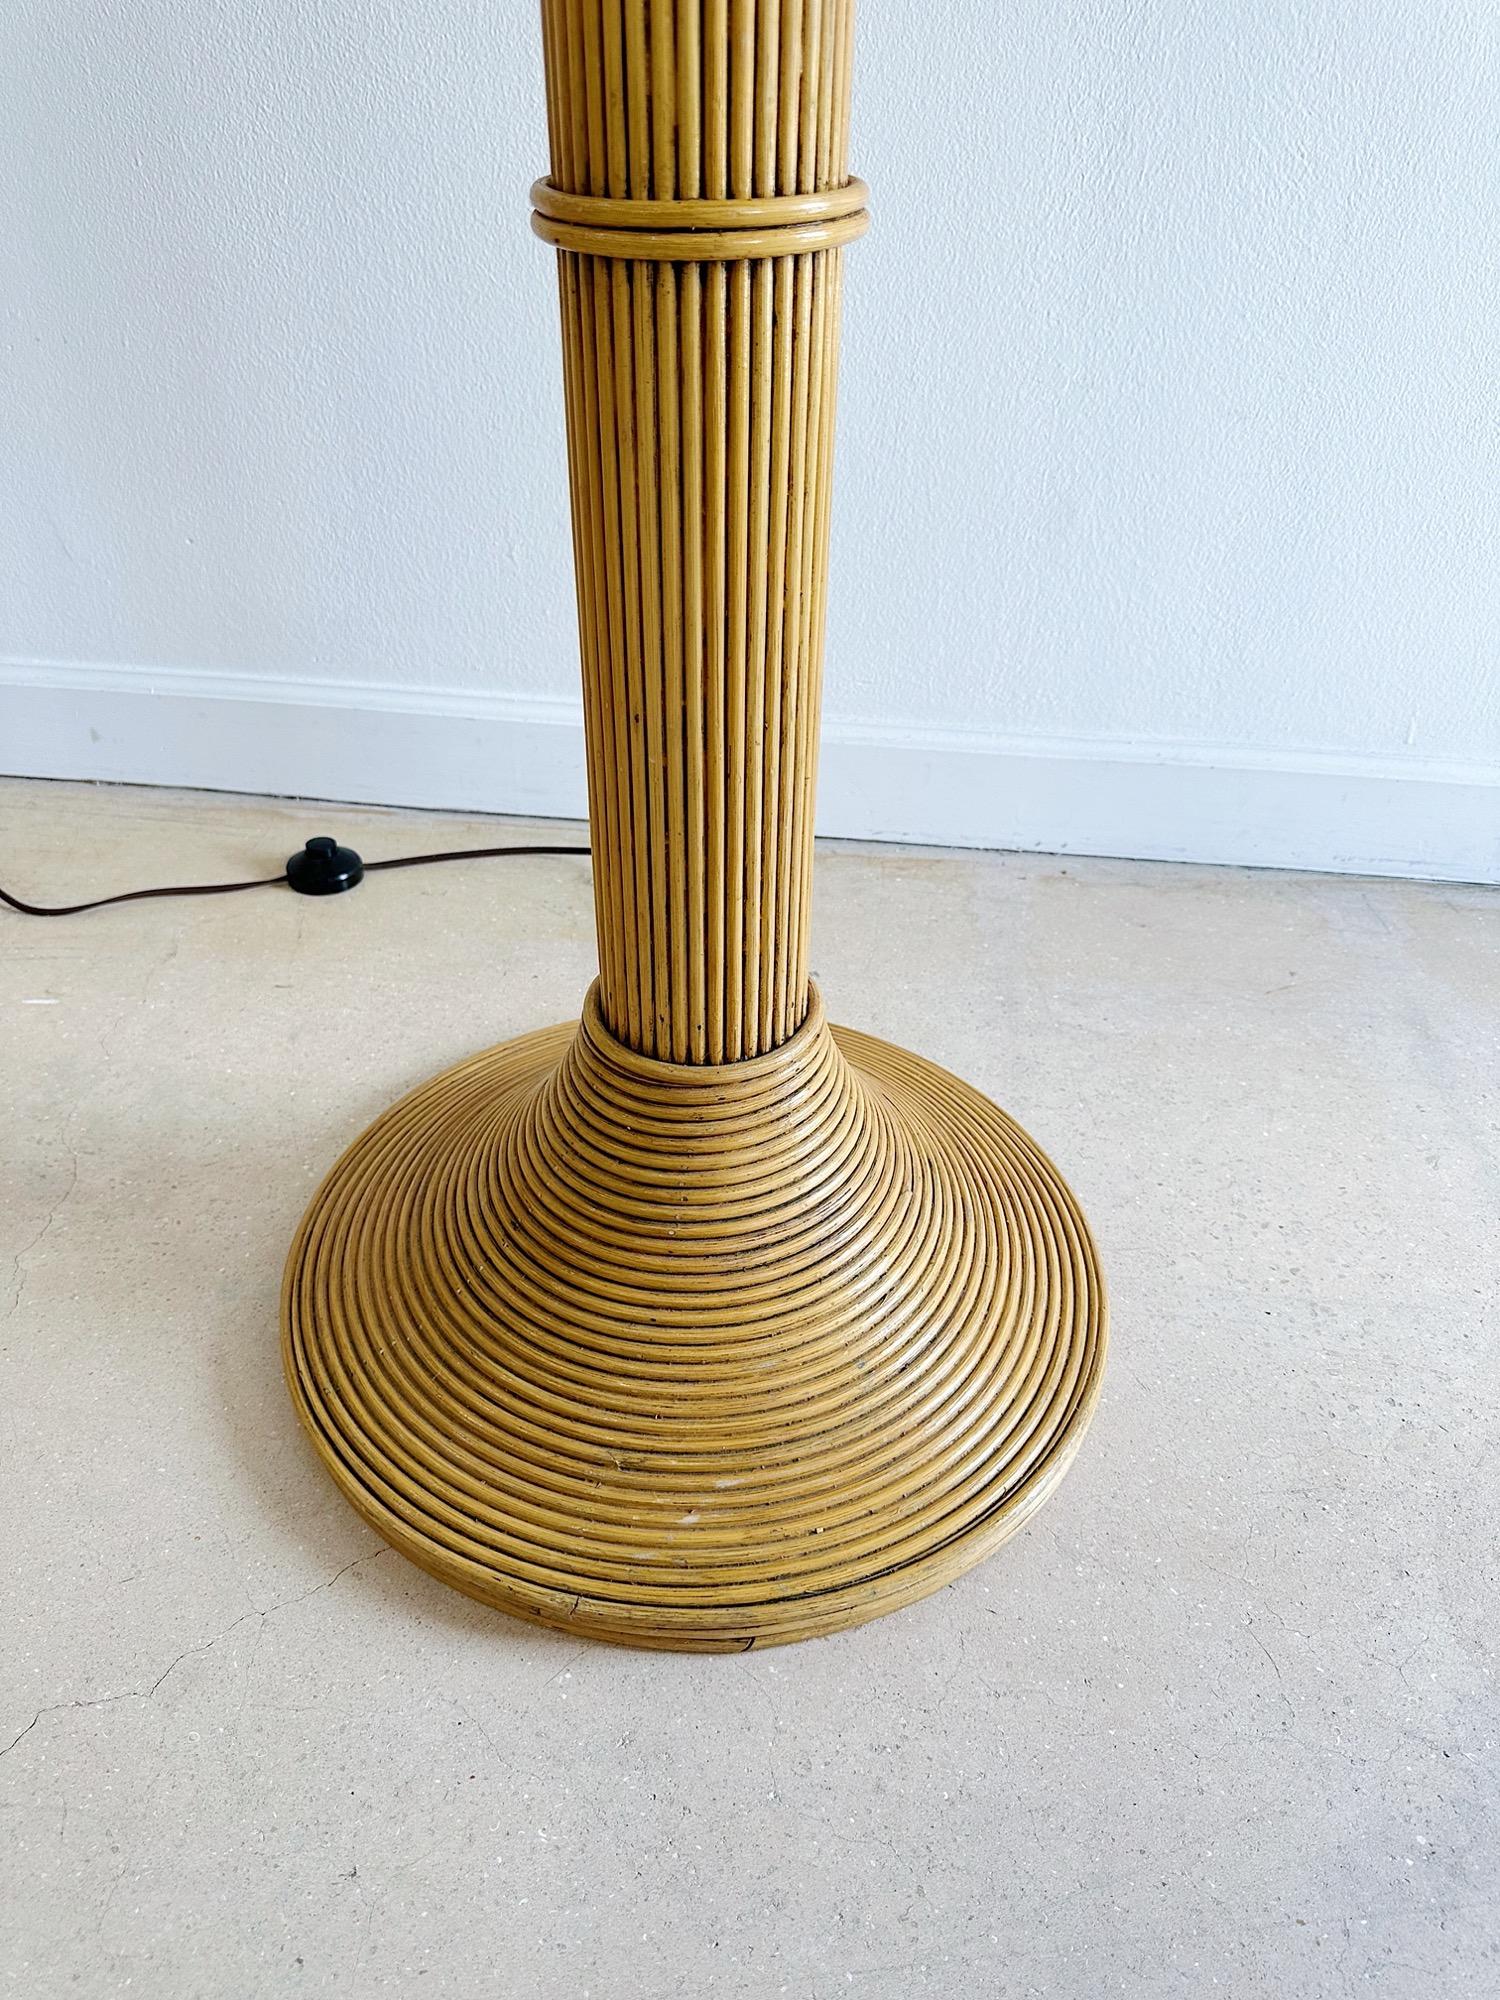 1970s Rattan and Wicker Palm Tree Floor Lamp For Sale 3